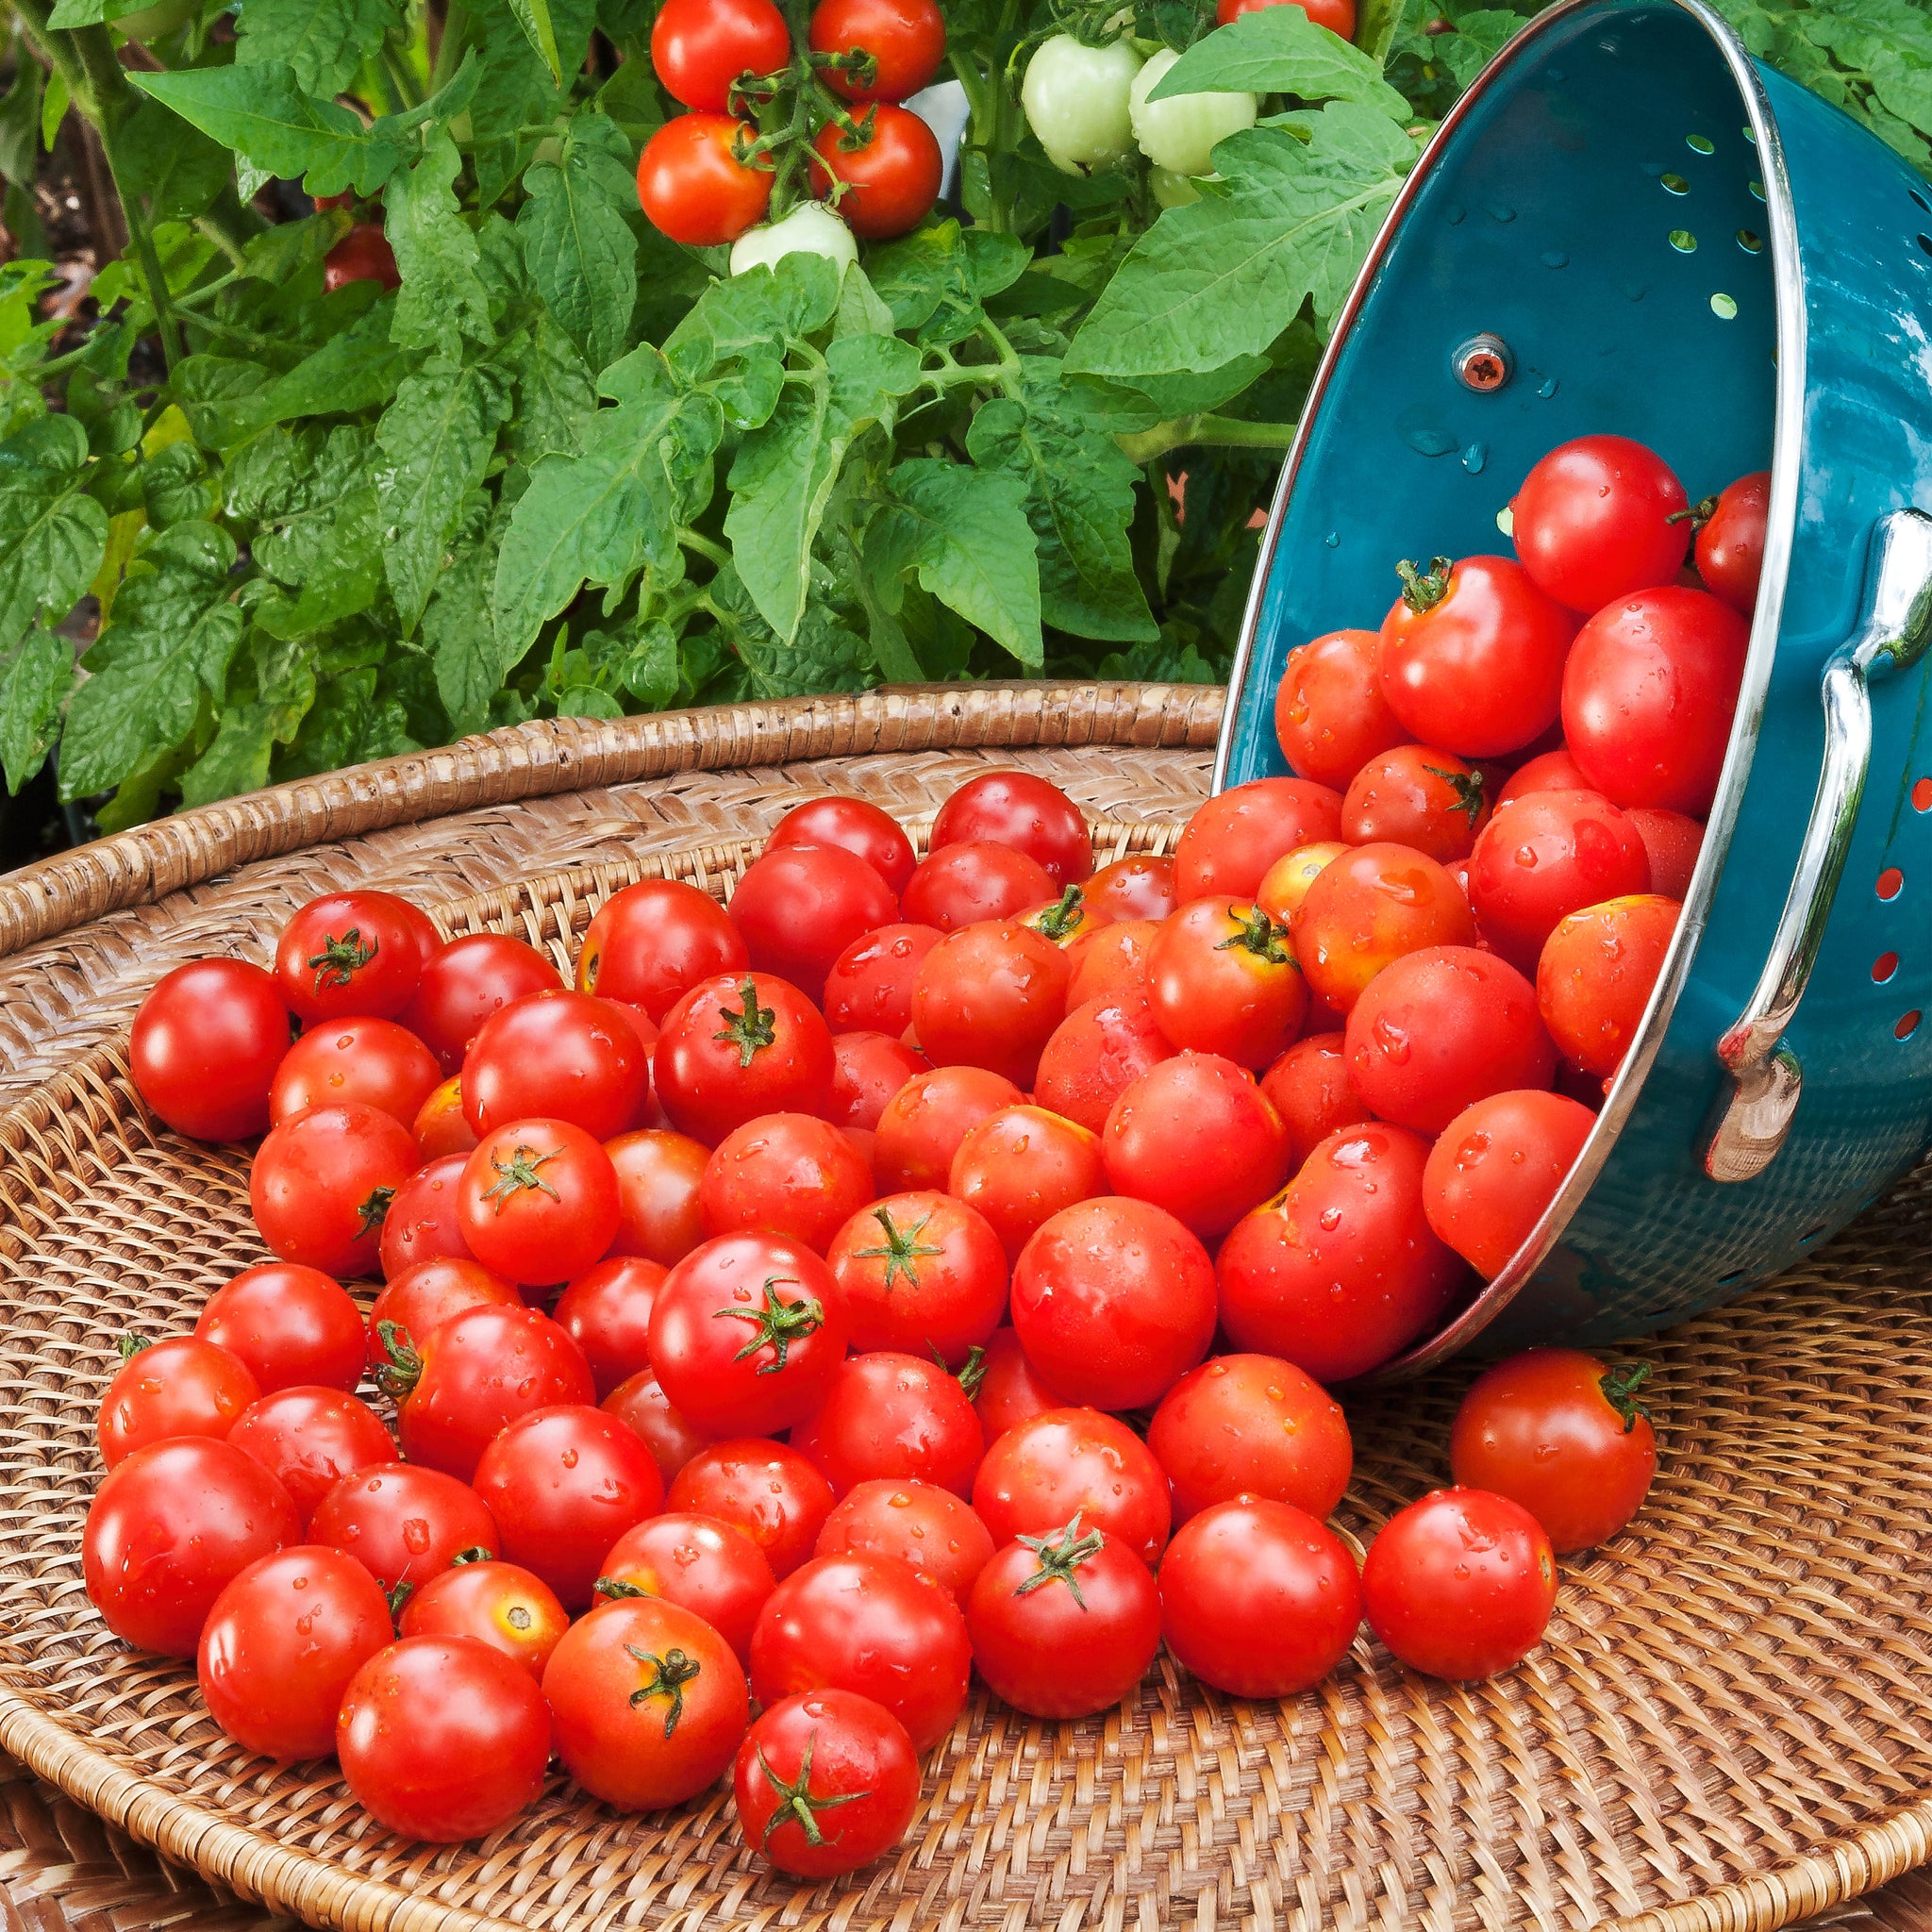 Tomato Plants Not Setting Fruit? Here's Why – Bonnie Plants